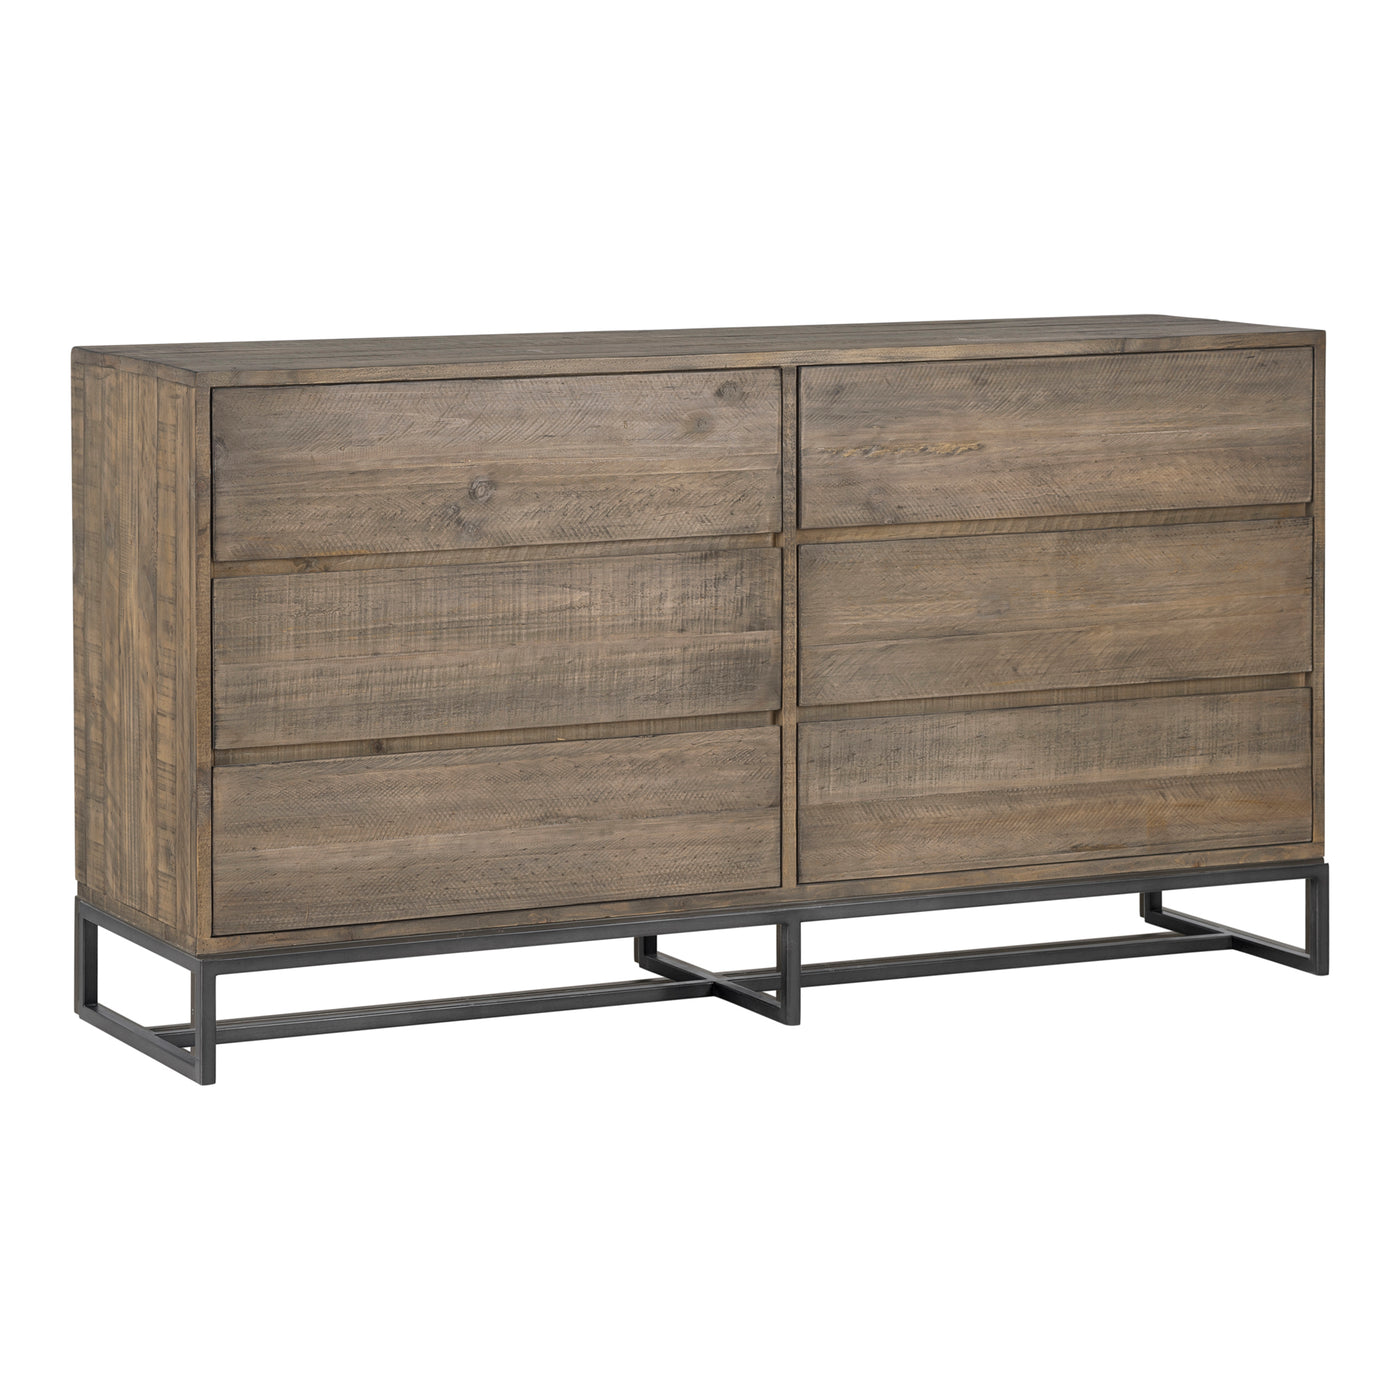 The Elena Dresser boasts a modern design entrenched in its rustic roots. Its solid pine construction has its own unique di...